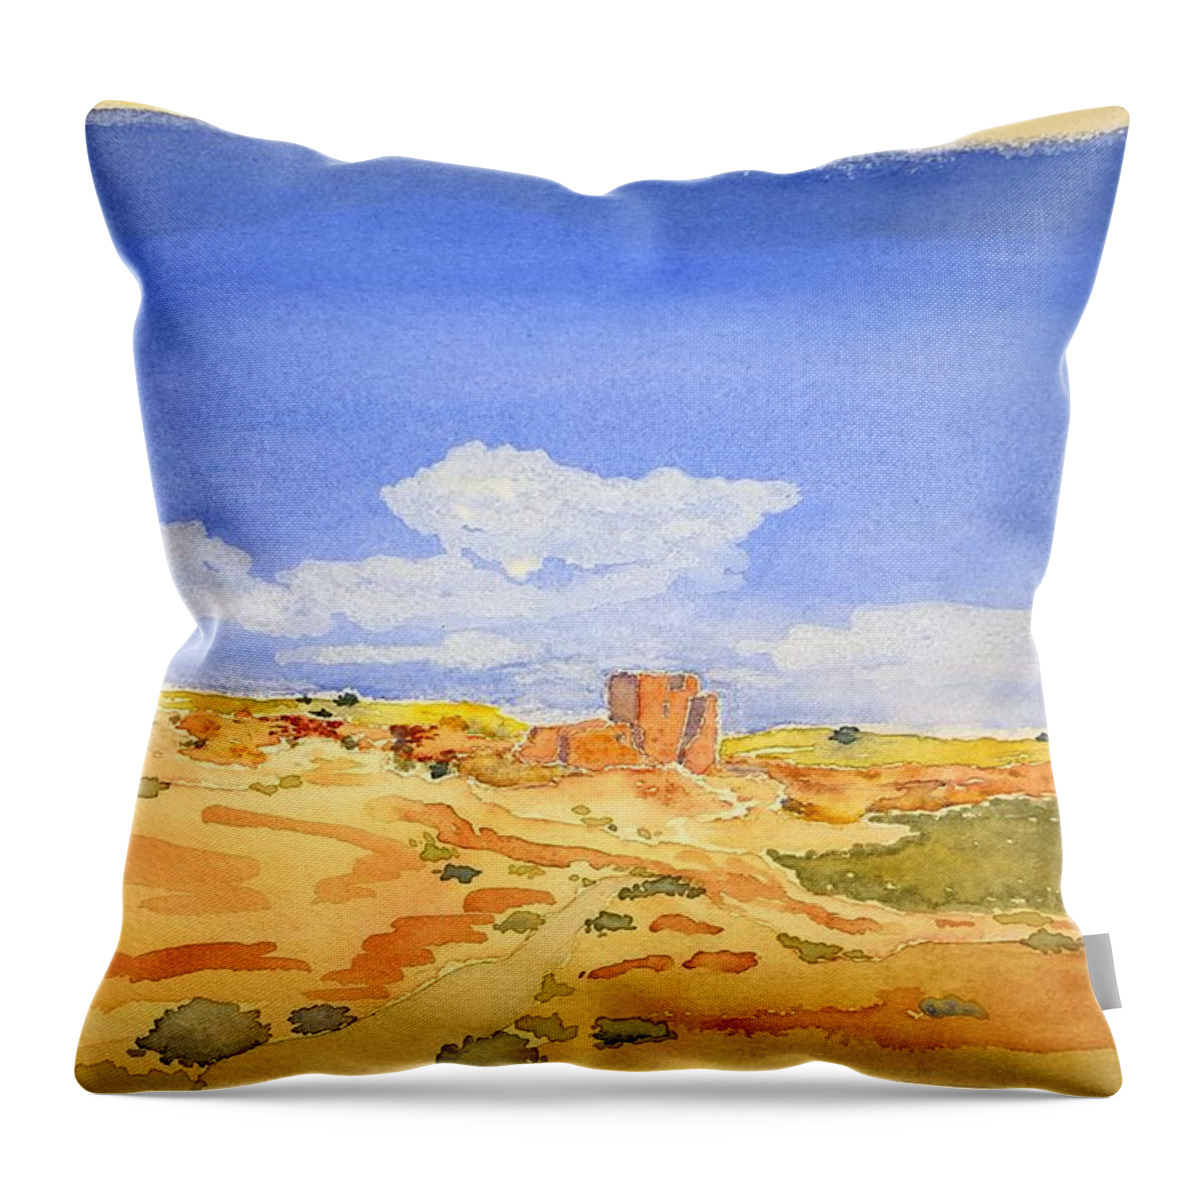 Watercolor Throw Pillow featuring the painting Sandstone Lore by John Klobucher